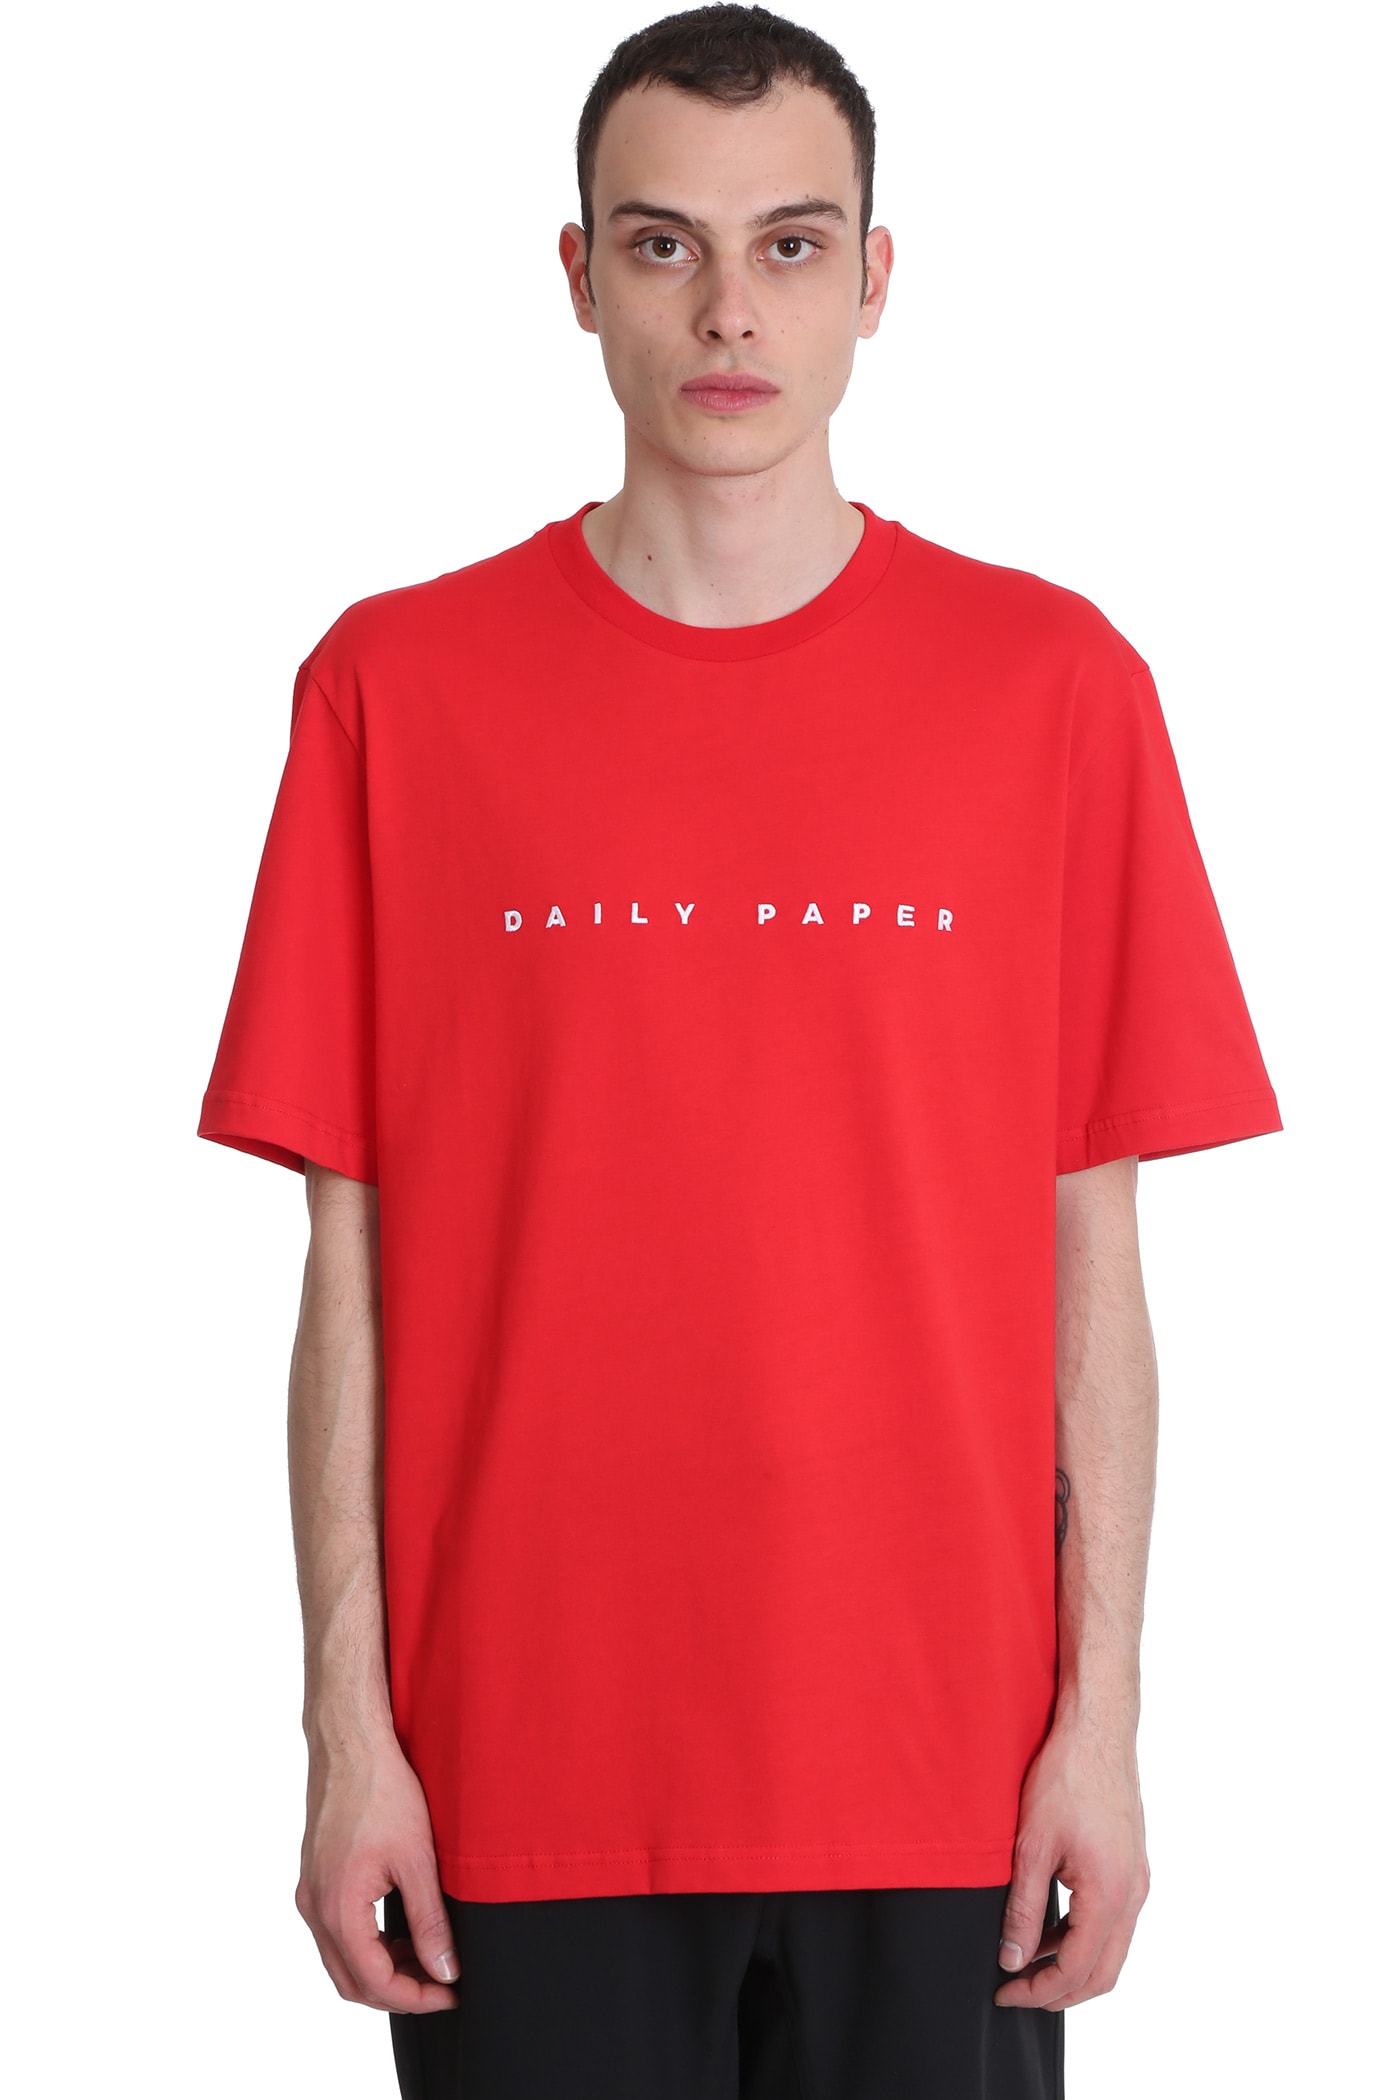 DAILY PAPER T-SHIRT IN RED COTTON,2111014